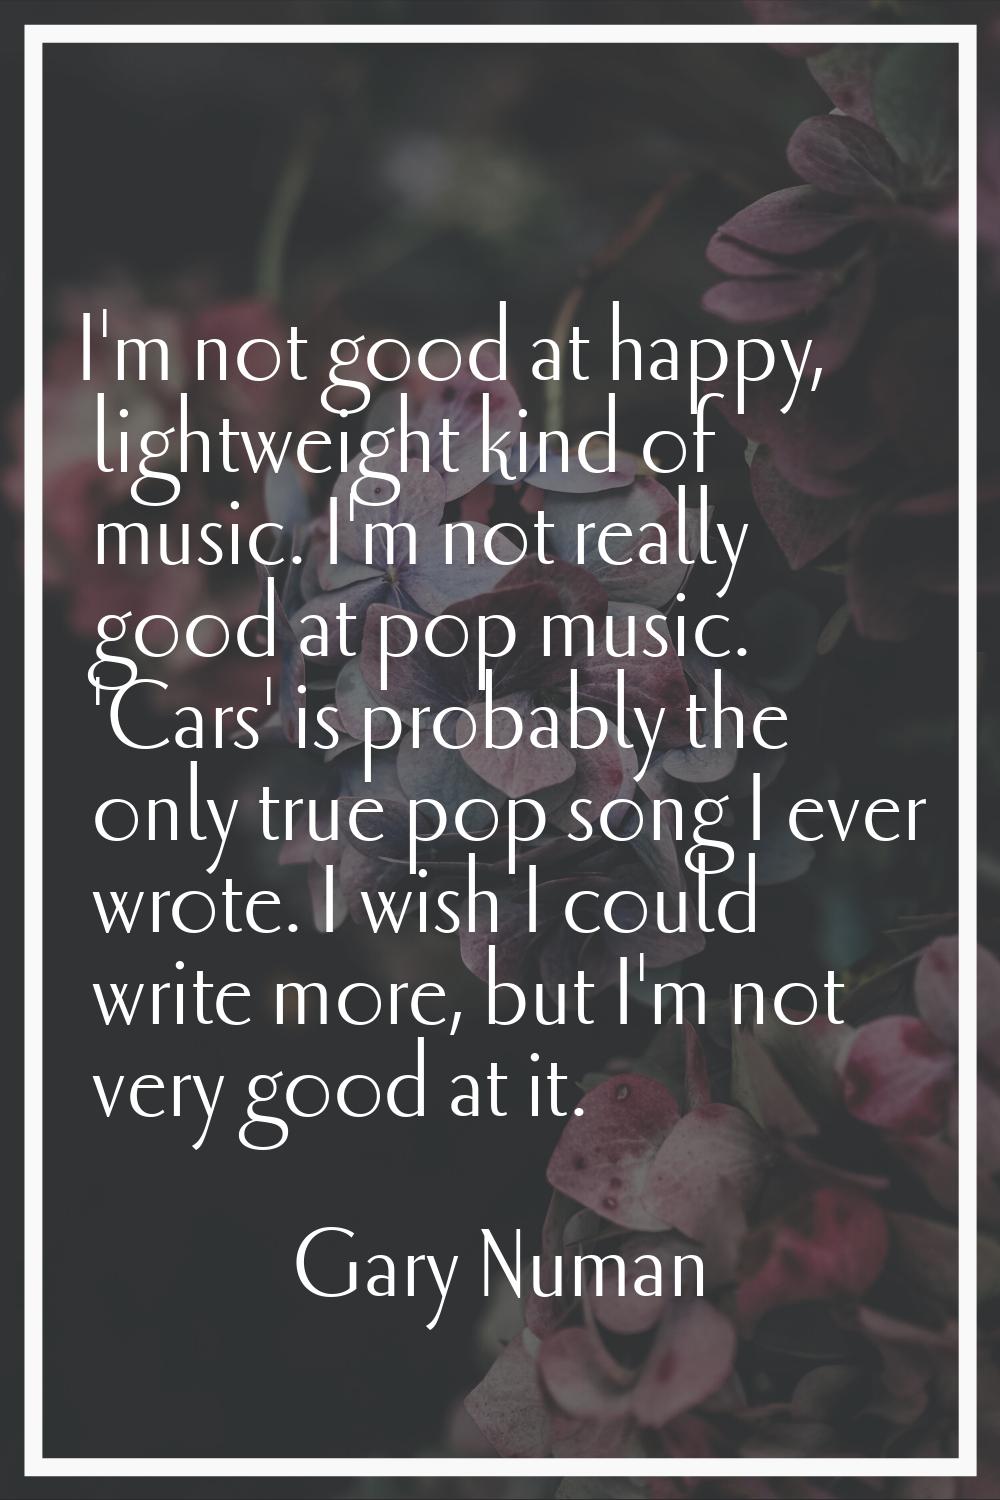 I'm not good at happy, lightweight kind of music. I'm not really good at pop music. 'Cars' is proba